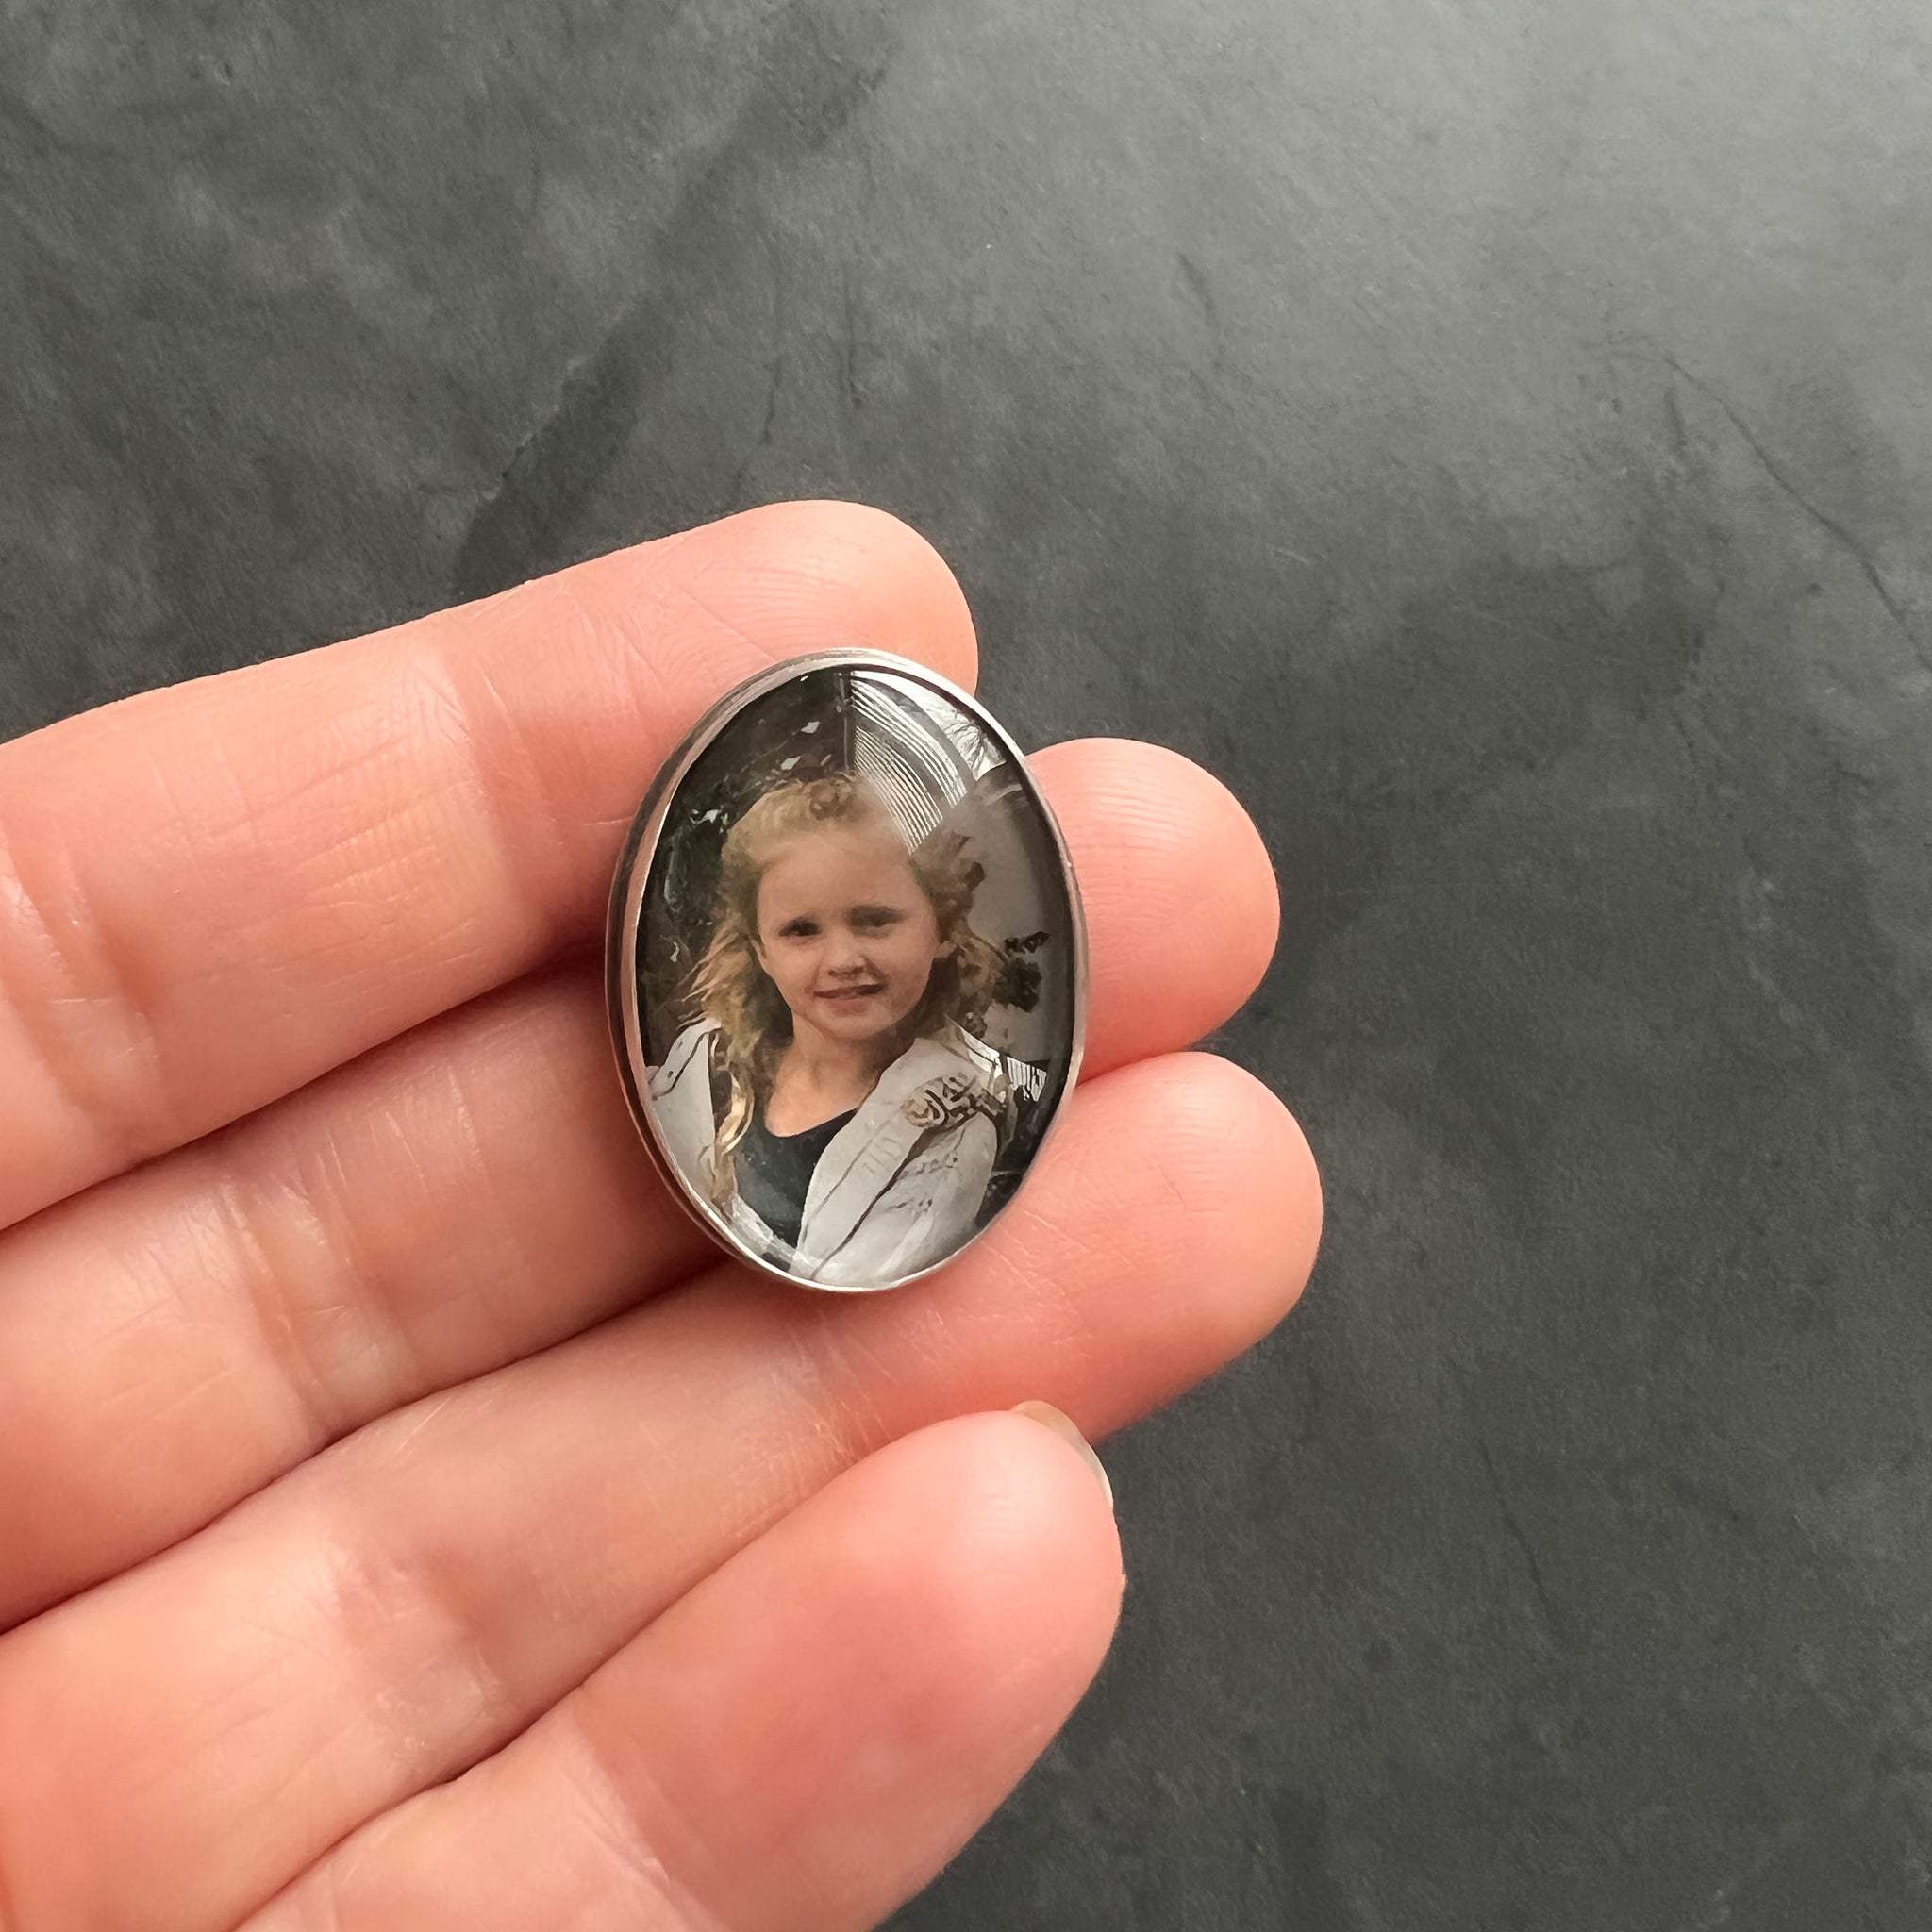 Sterling Silver Photo Brooch — Perfect Customized Gift for Mother's Day for Mom or Grandmom or New Mom!  Sterling Silver Pin with Real Photo